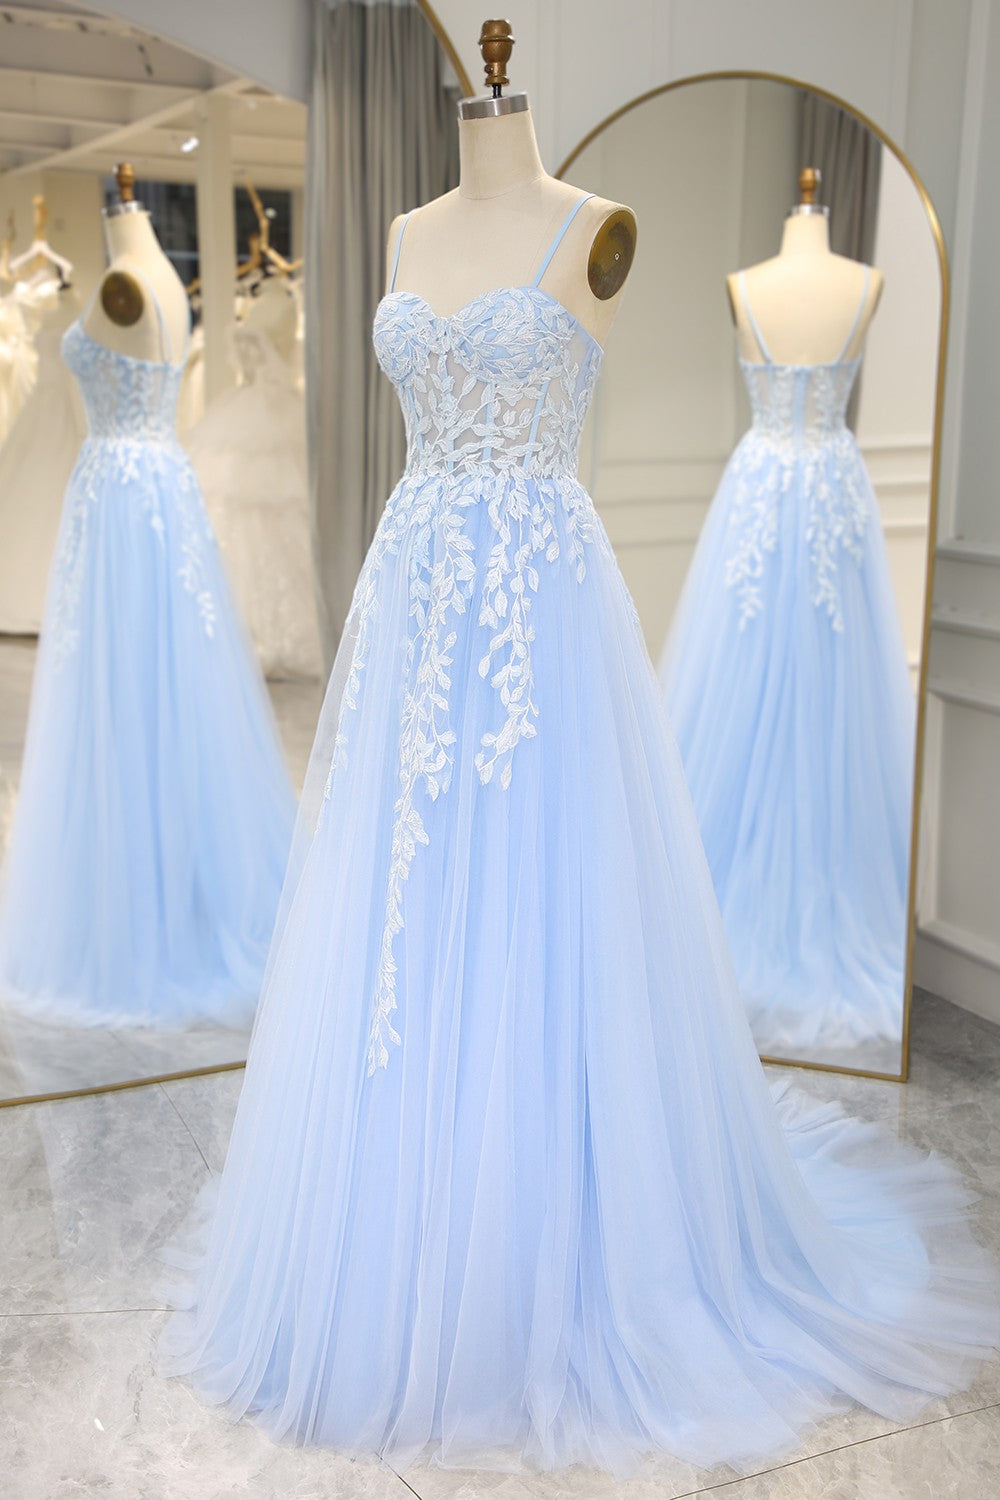 Prom Dress Affordable, Sky Blue Spaghetti Straps Long Mermaid Prom Dress With Appliques